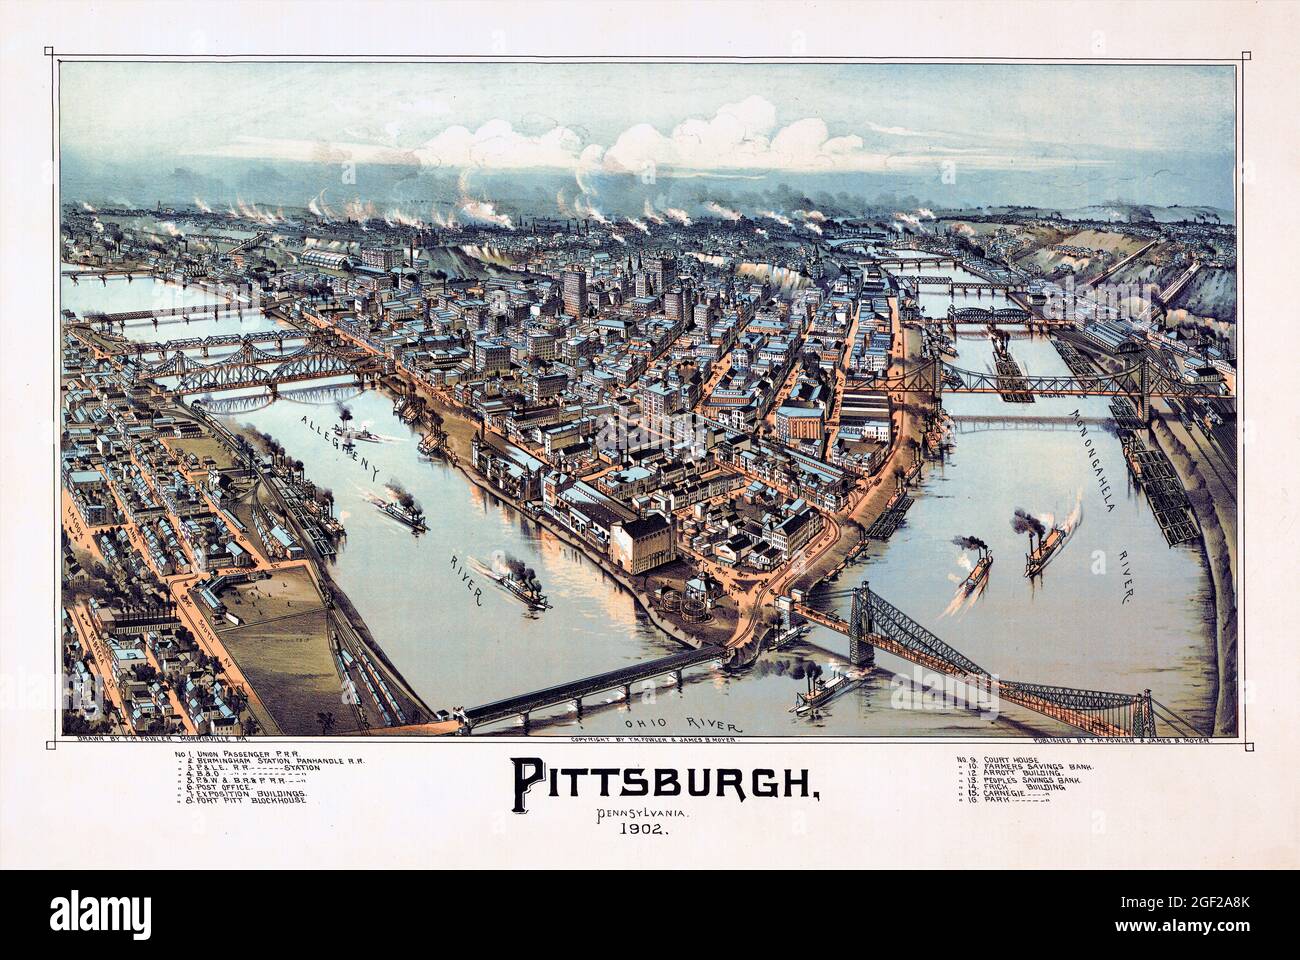 Pittsburgh, Pennsylvania 1902 by Thaddeus Mortimer (T.M.) Fowler (1842-1922) . Restored vintage poster published in 1902 in the USA. Stock Photo